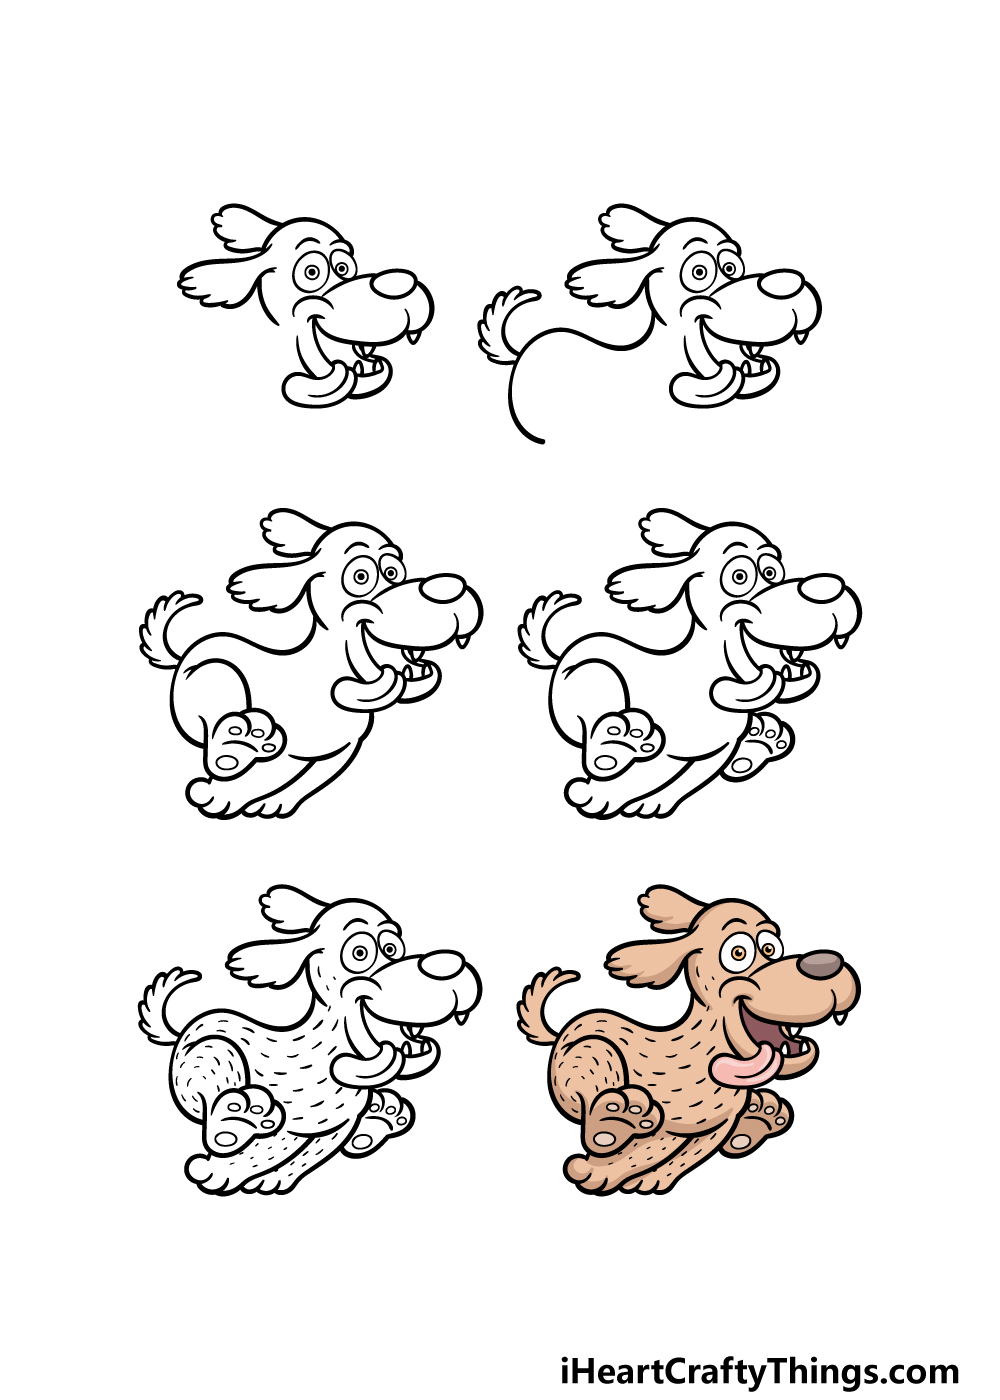 how to draw a cartoon dog in 6 steps